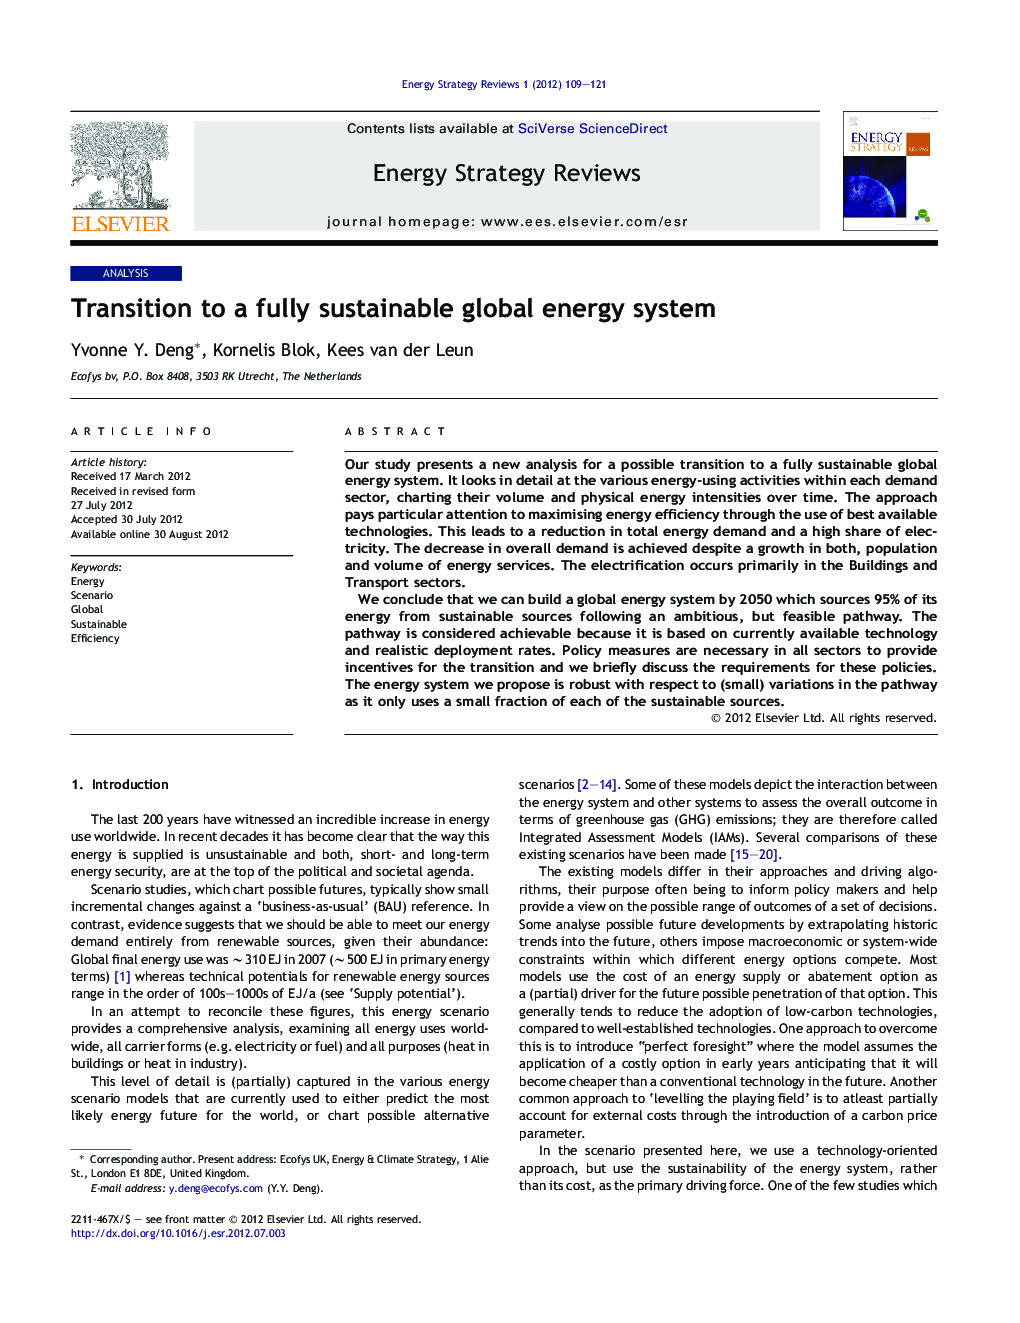 Transition to a fully sustainable global energy system